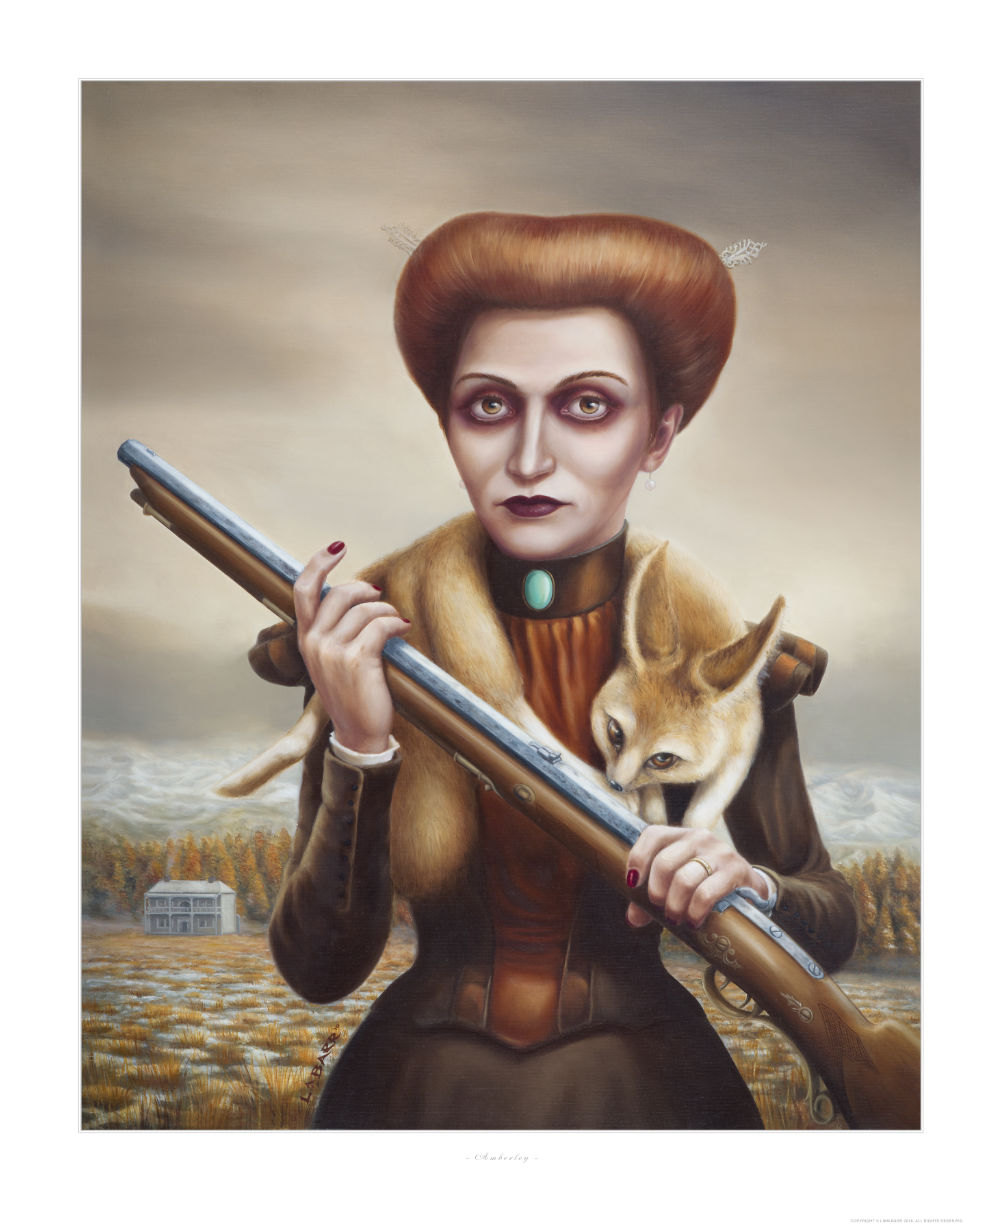 Fine Art print of woman protecting her land with gun and fox stole